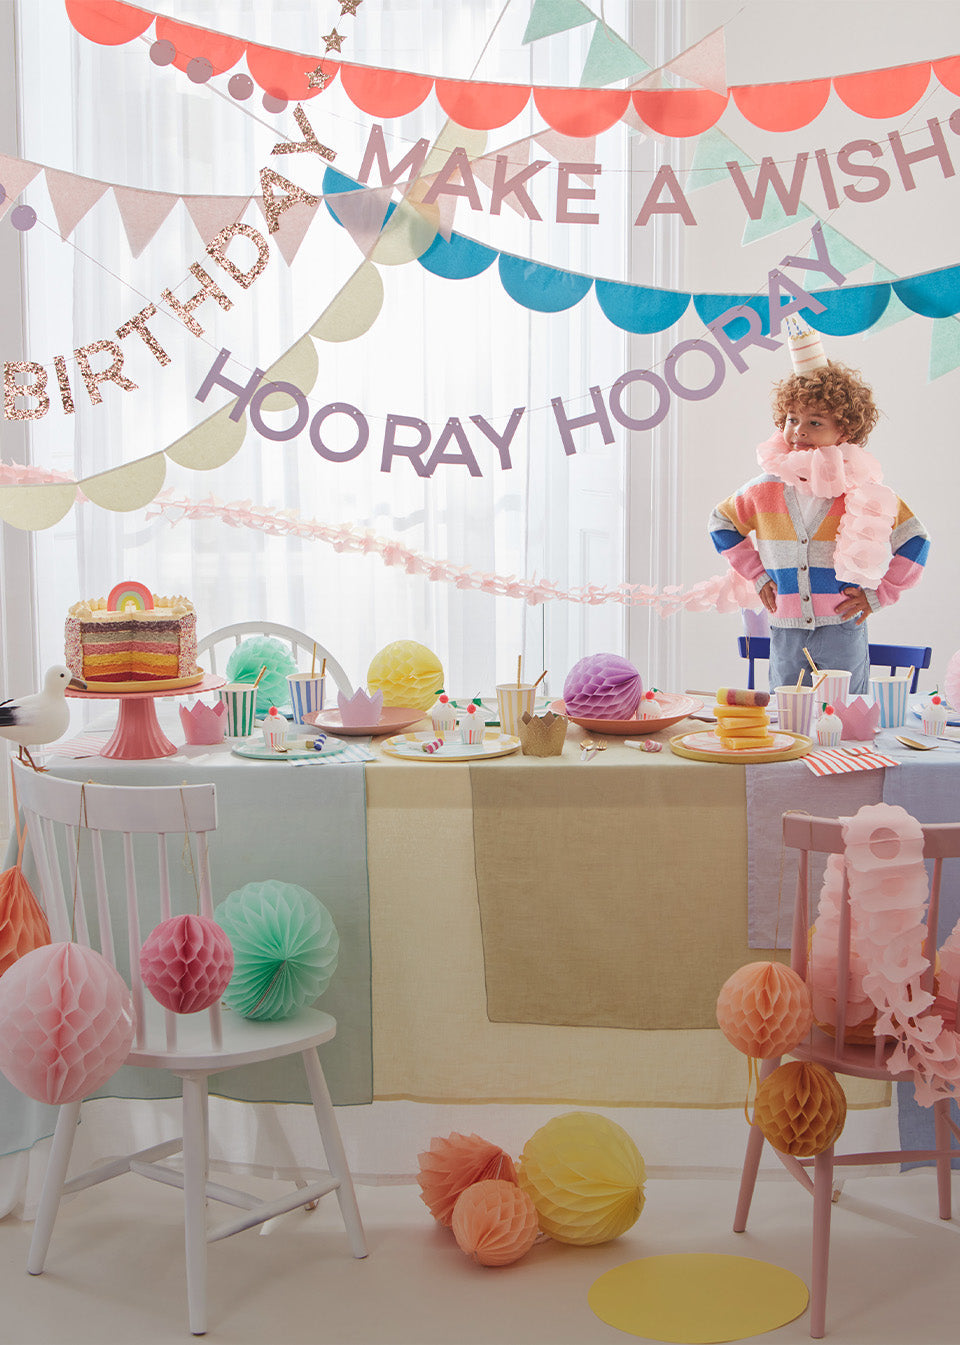 A little boy is standing around a colorful table lined with honeycomb decorations, bright garlands and banners, and rainbow tableware